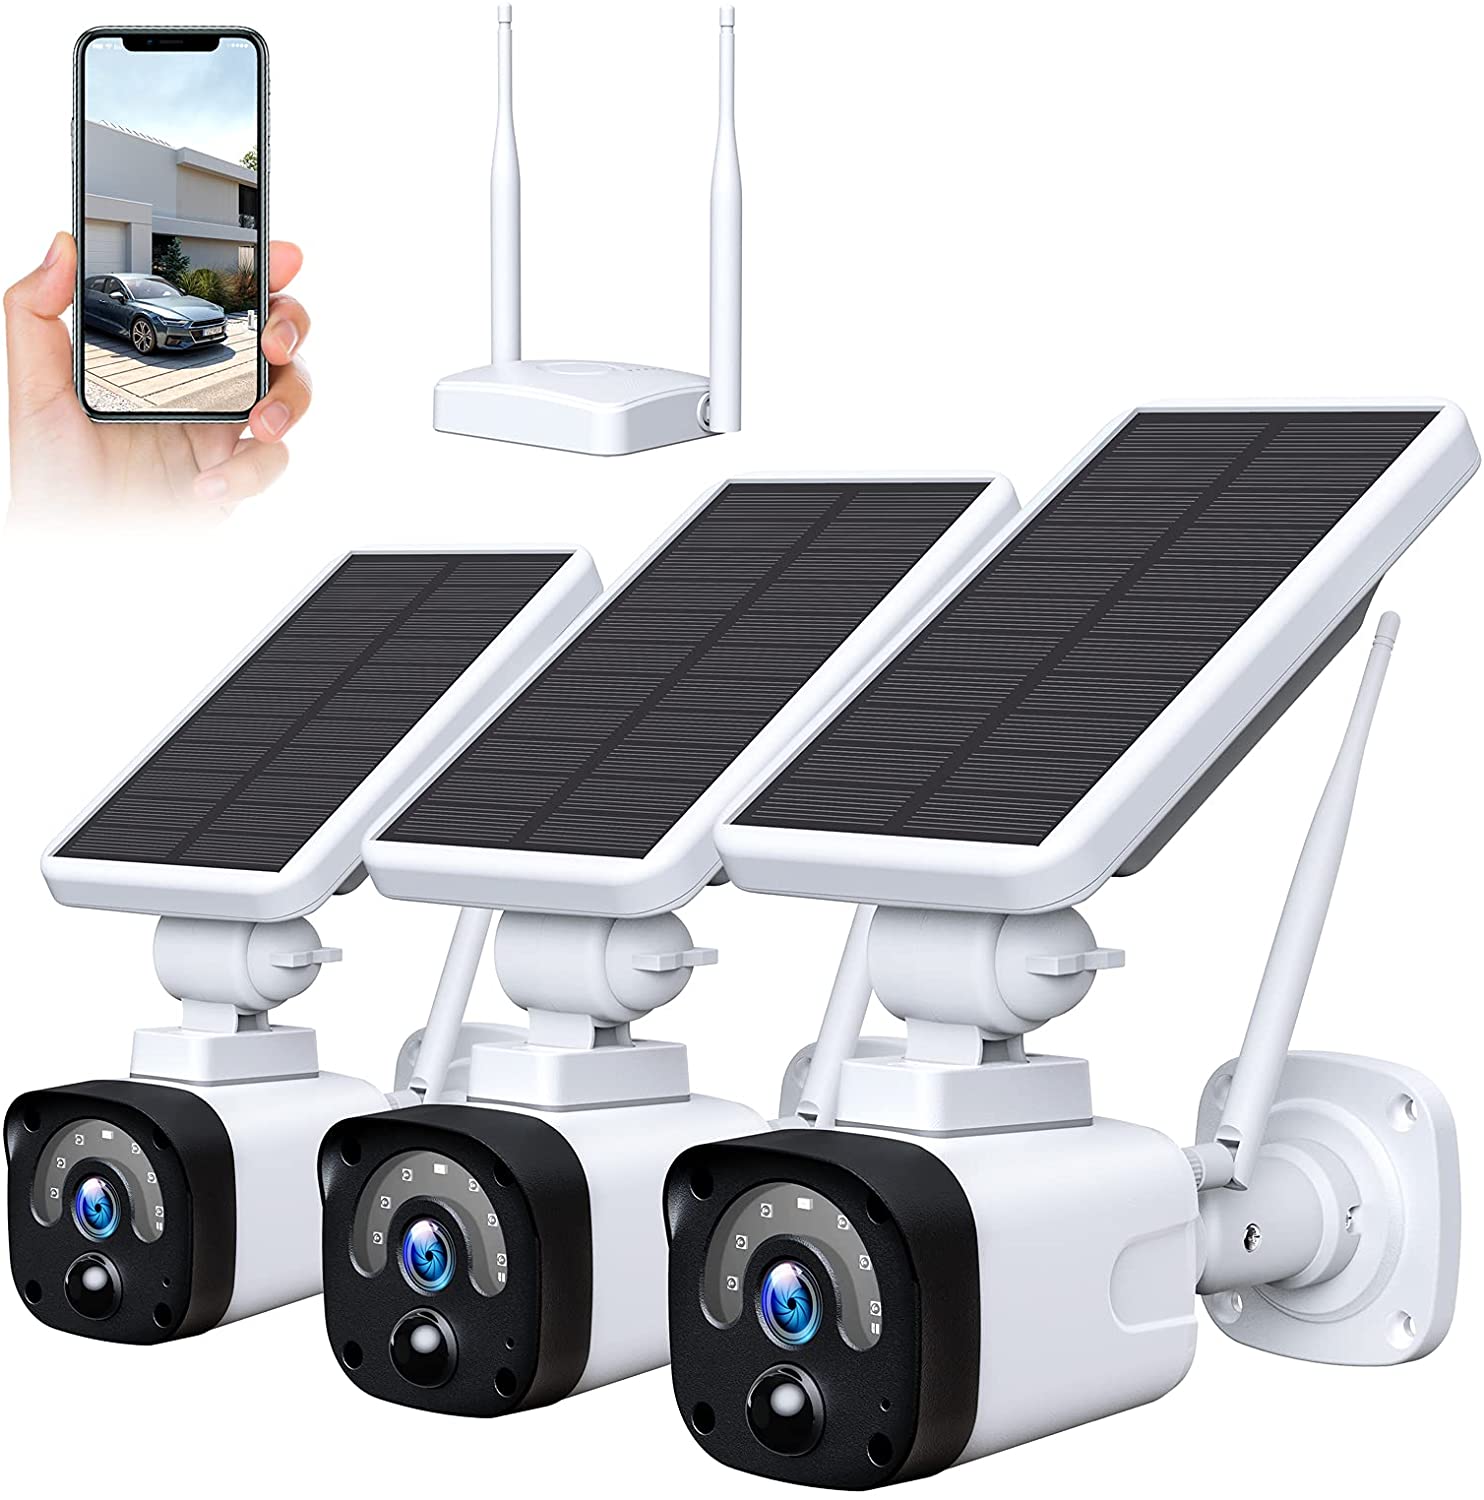 Toguard W603 Wireless Security Camera System Outdoor, 3MP Solar Surveillance Camera System Include Base Station and 3 WiFi Cameras